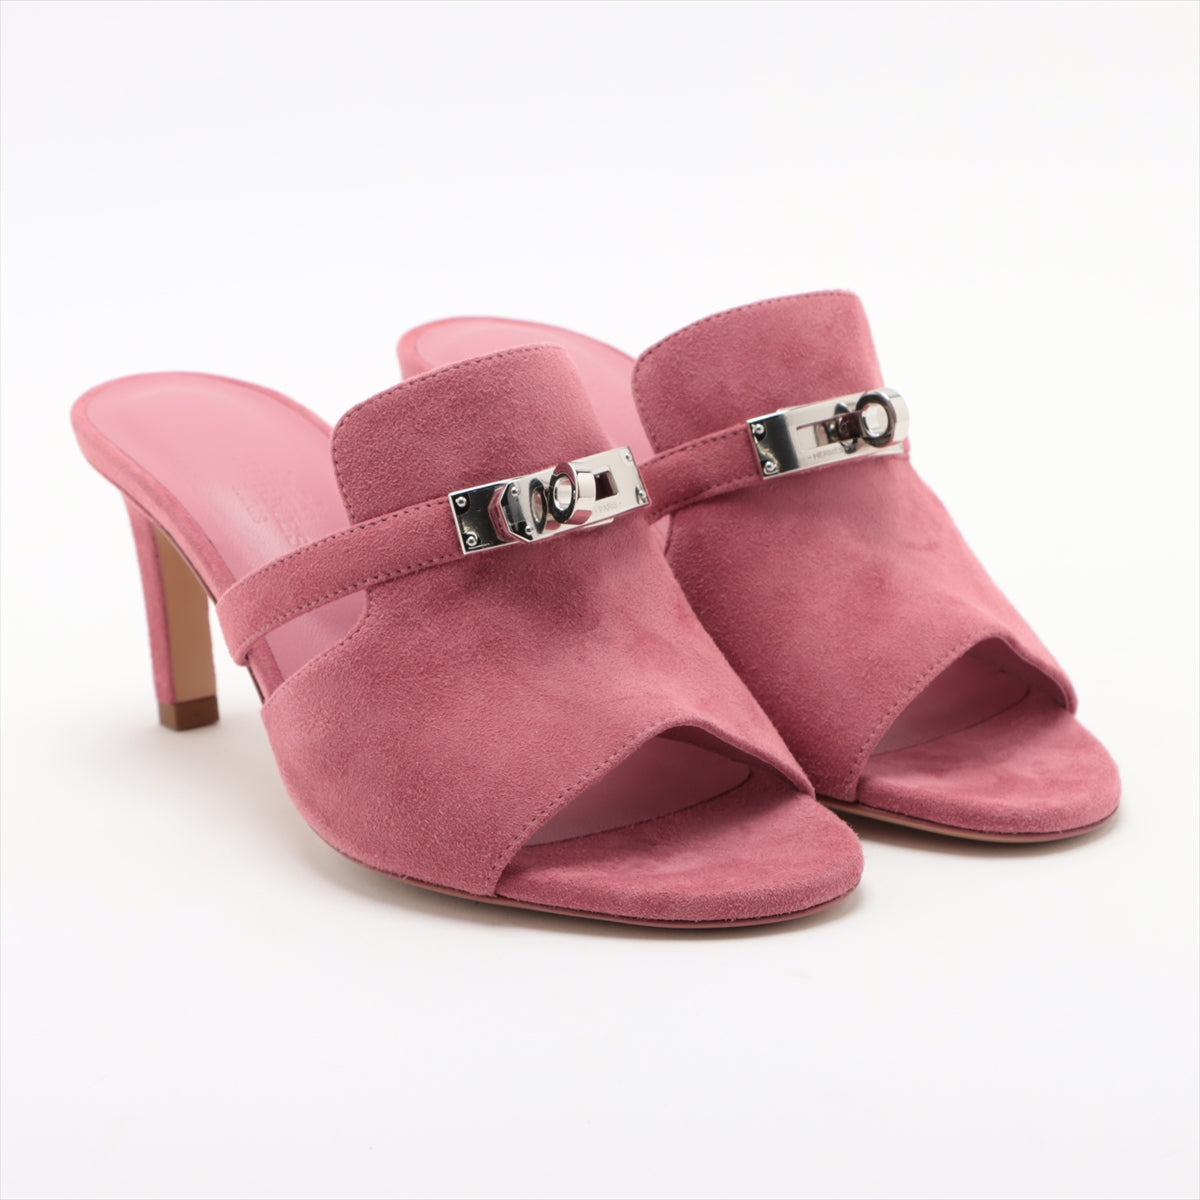 Hermès Suede leather Sandals 35 Ladies' Pink cute Kelly Metal Fittings Box sack Replacement lift available